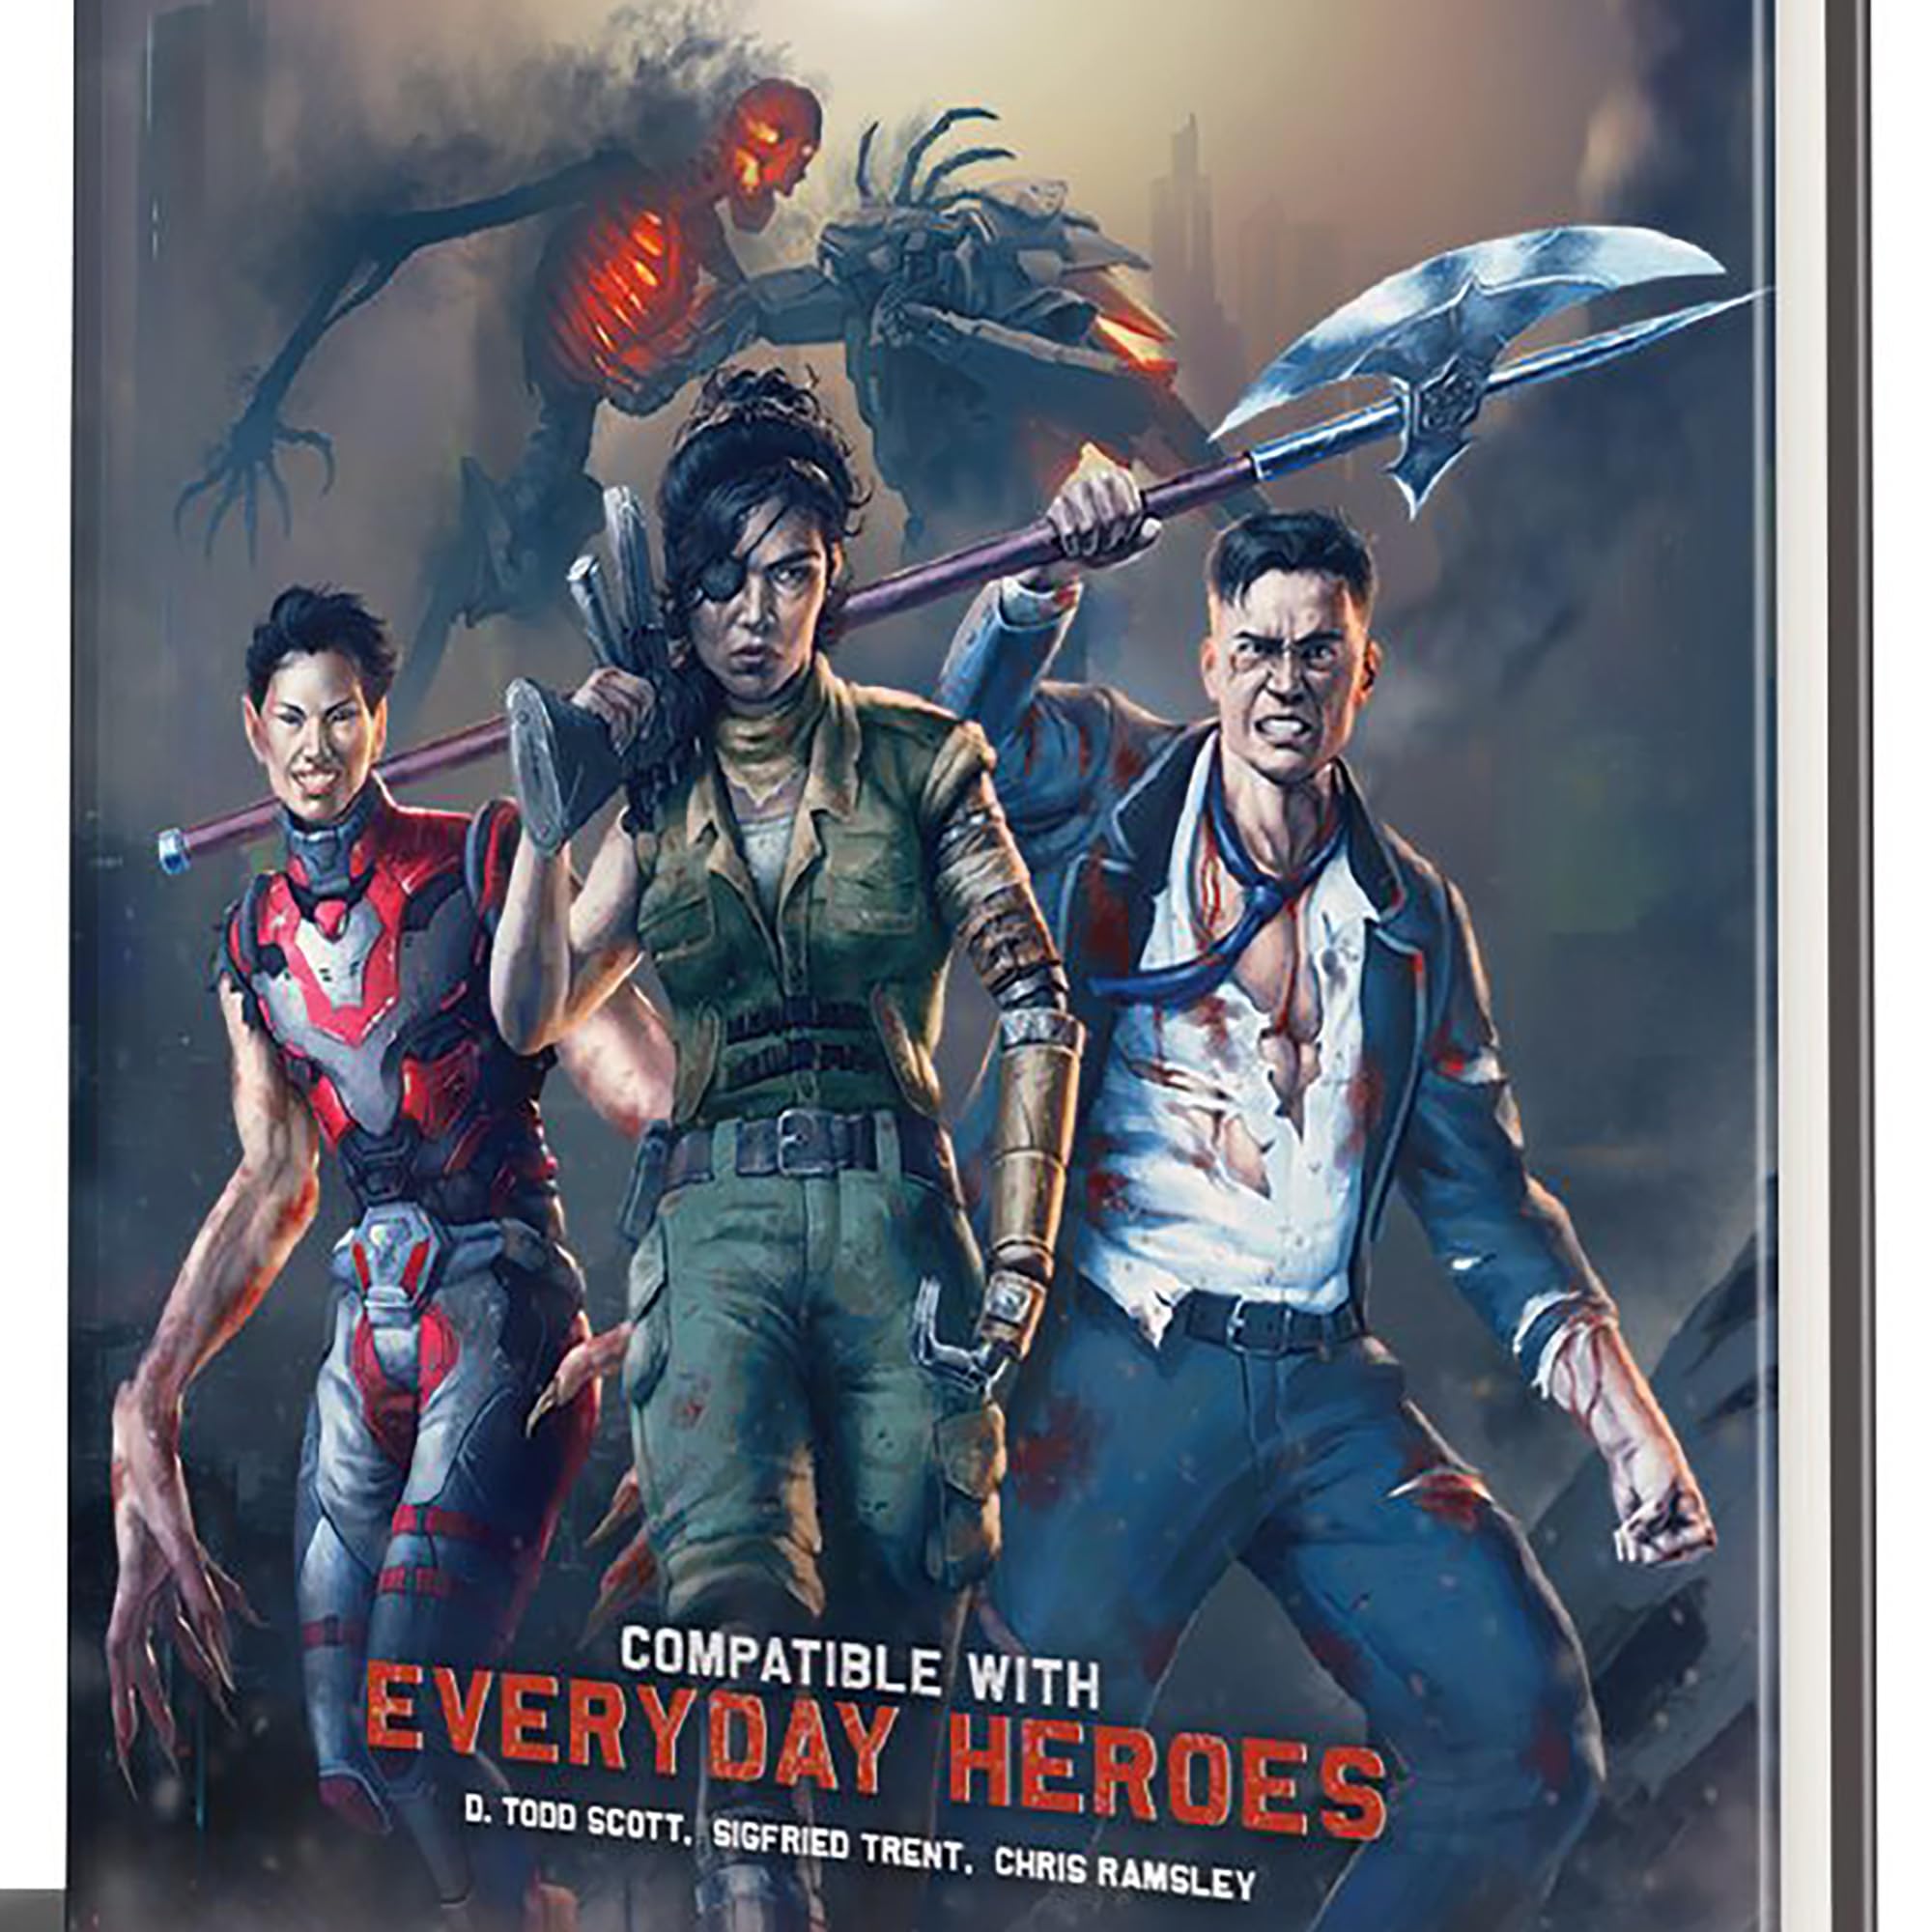 Everyday Heroes: The Vault: Rules Compendium Vol 1 - Cinematic Adventures Rules, Hardcover RPG Book, Expanded Rules & Options, Roleplaying